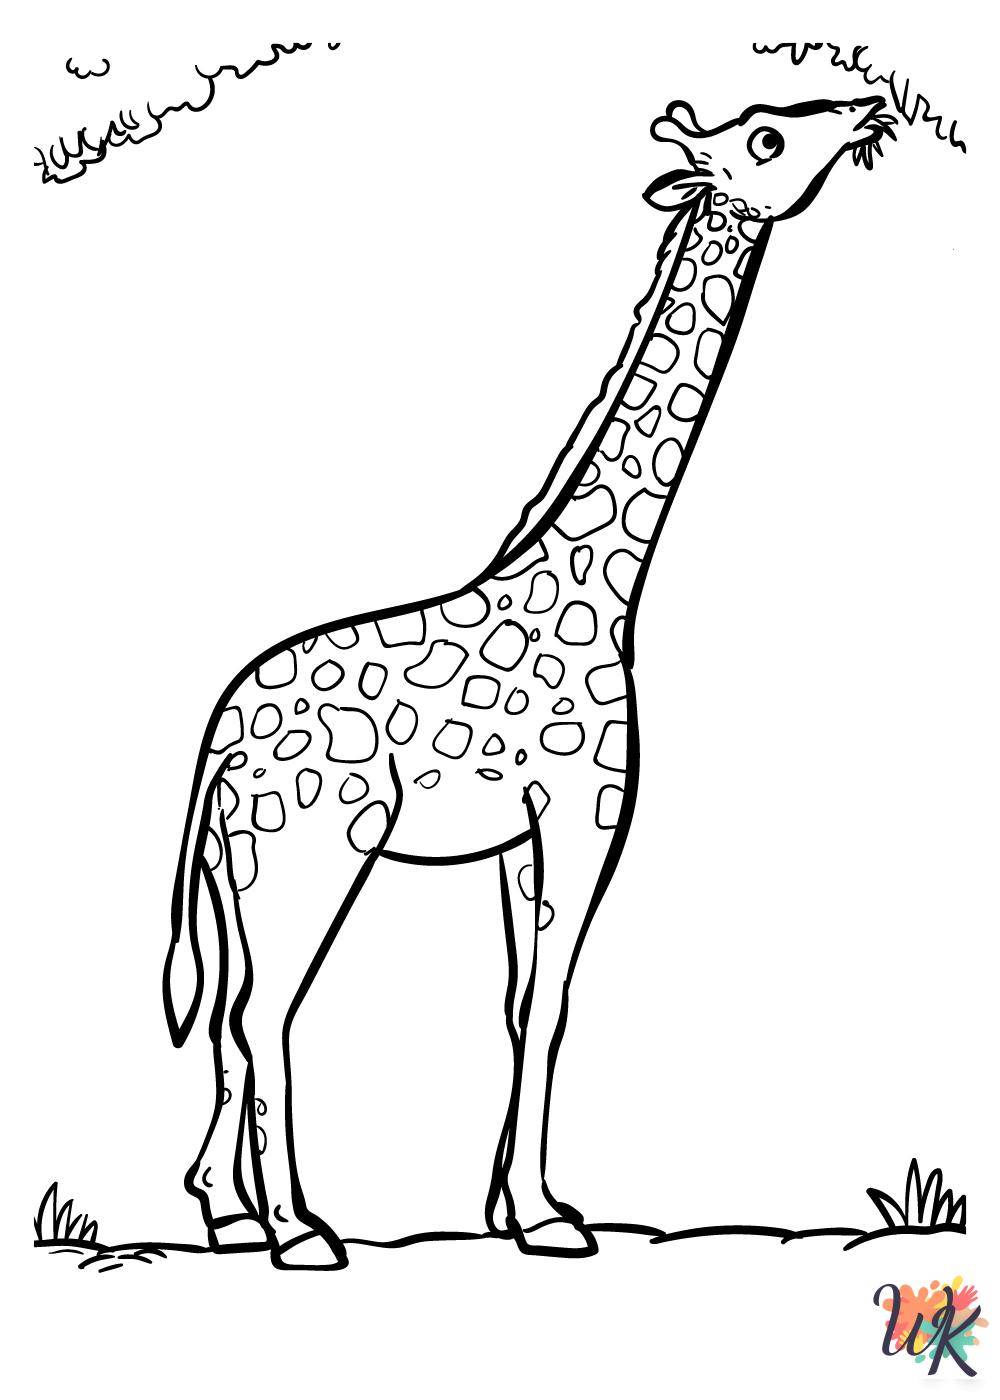 Giraffe adult coloring pages